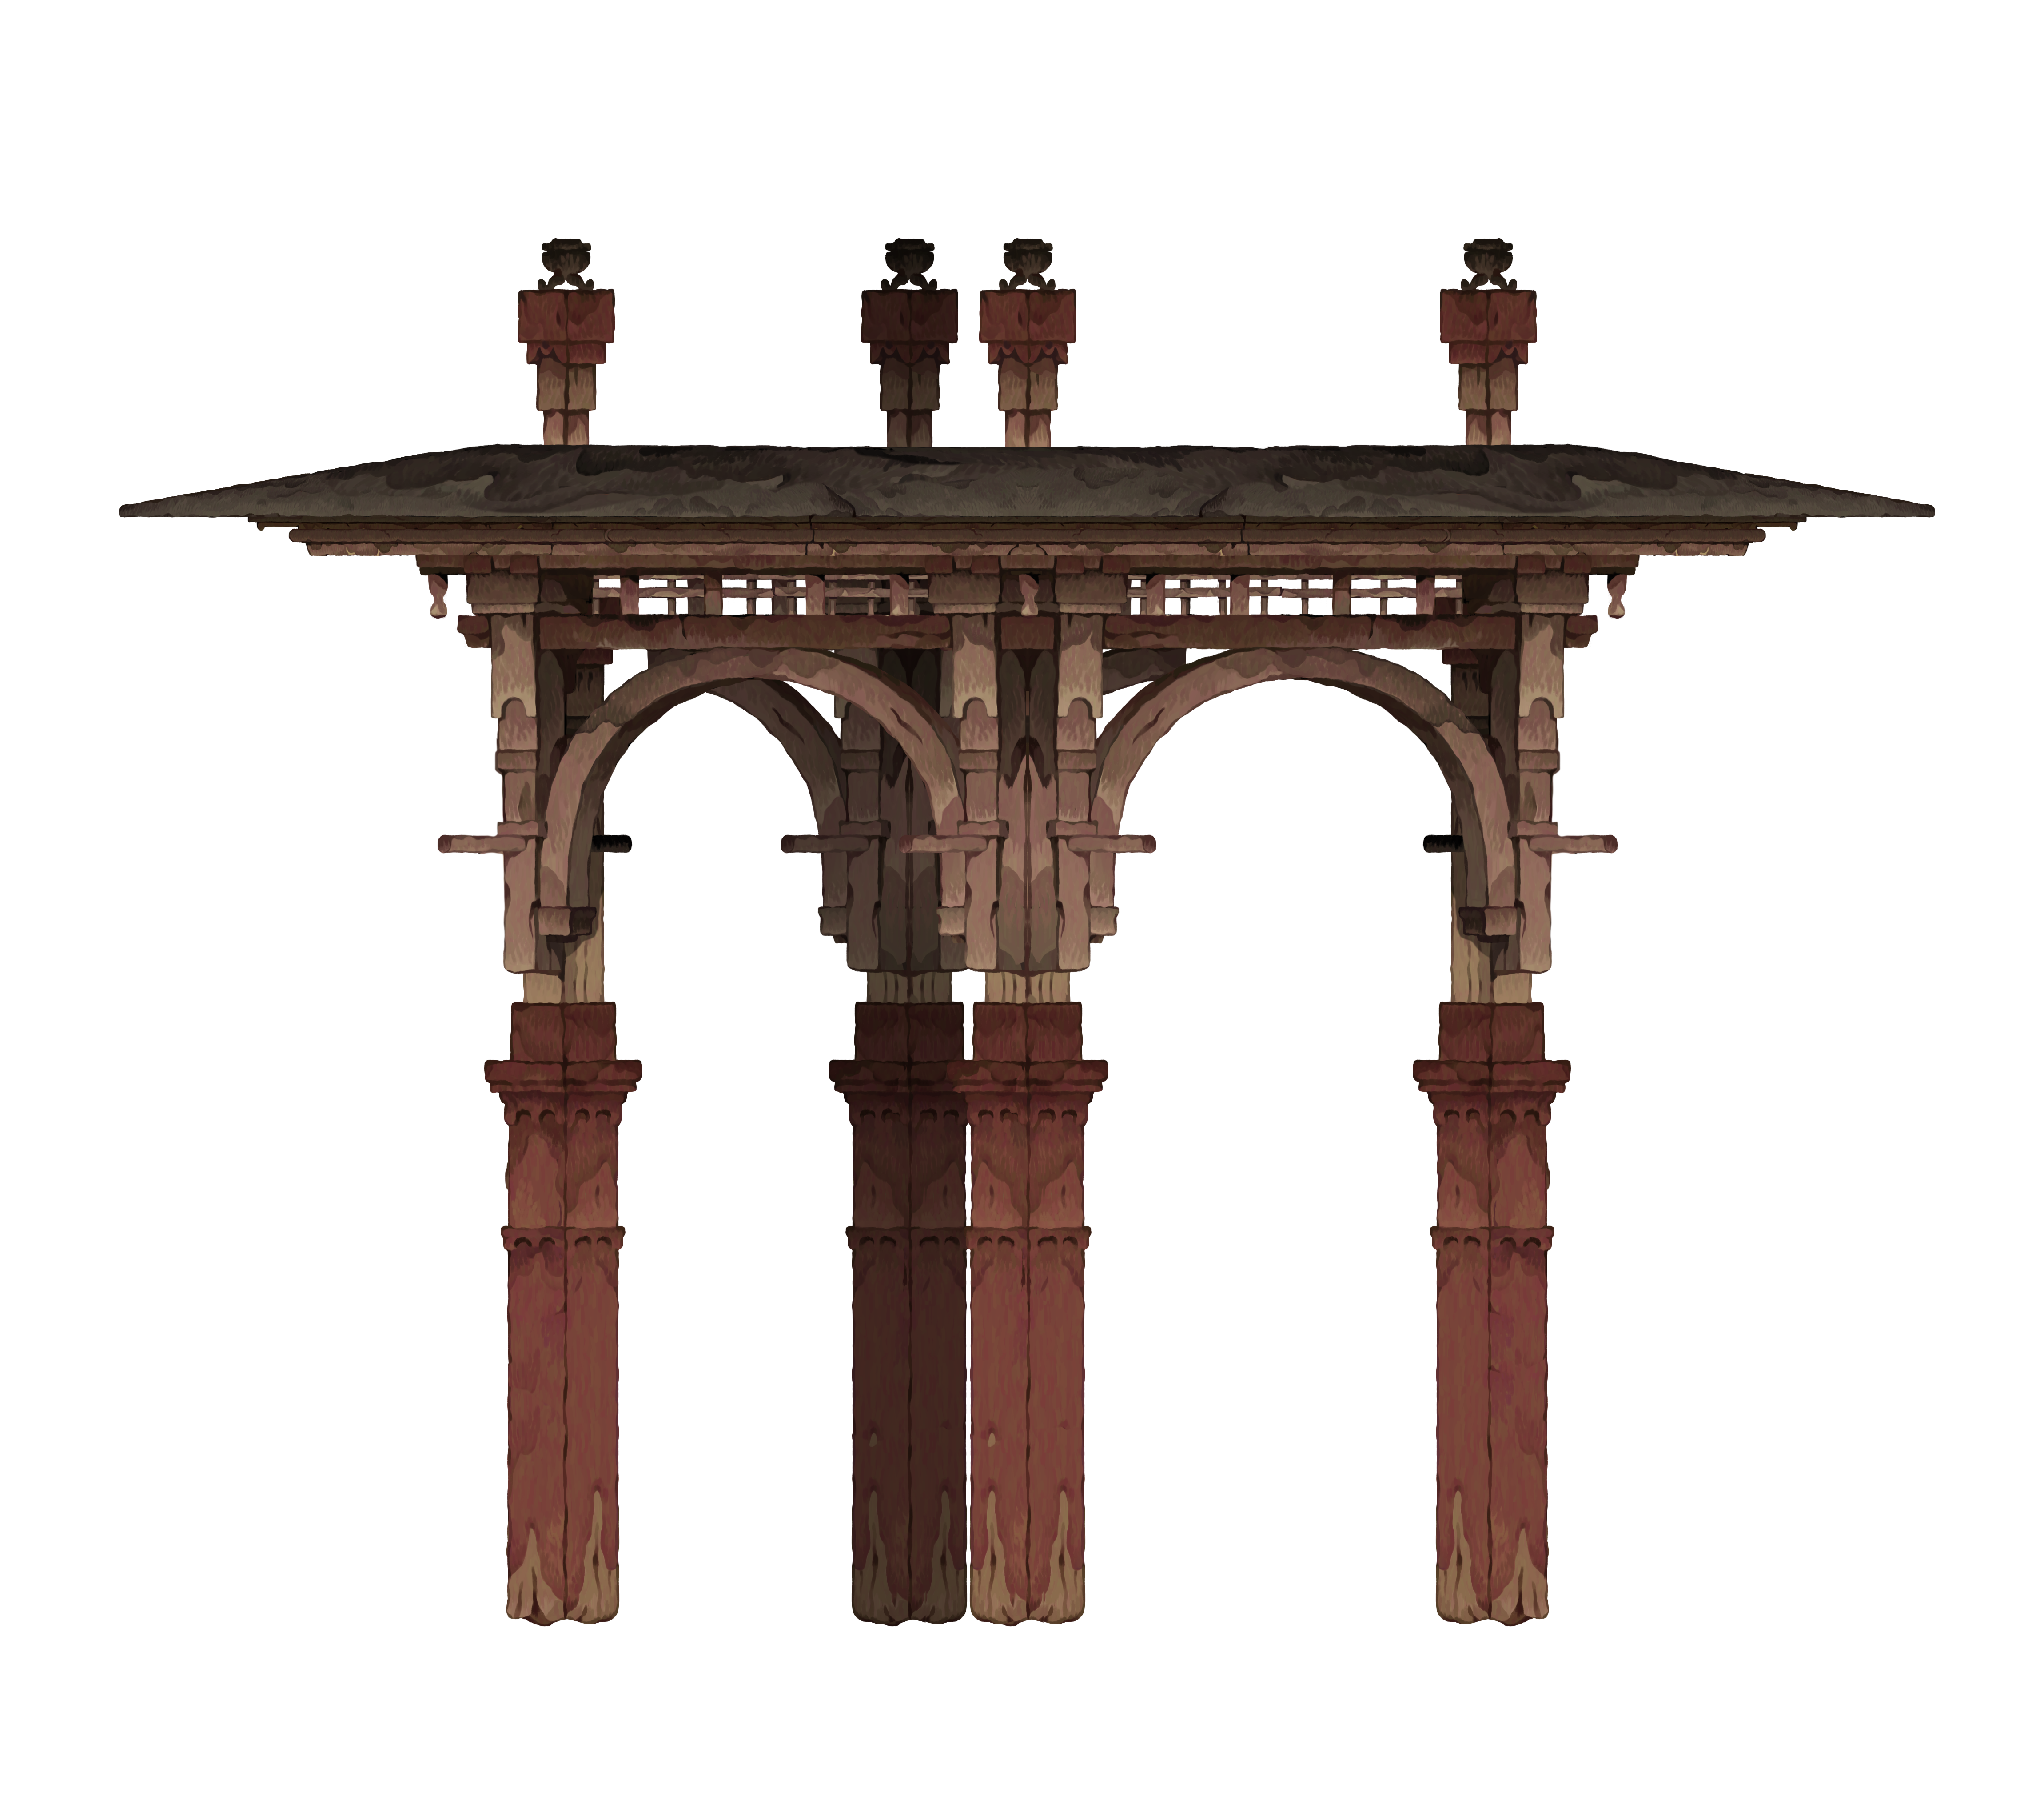 A structure with four pillars and a roof